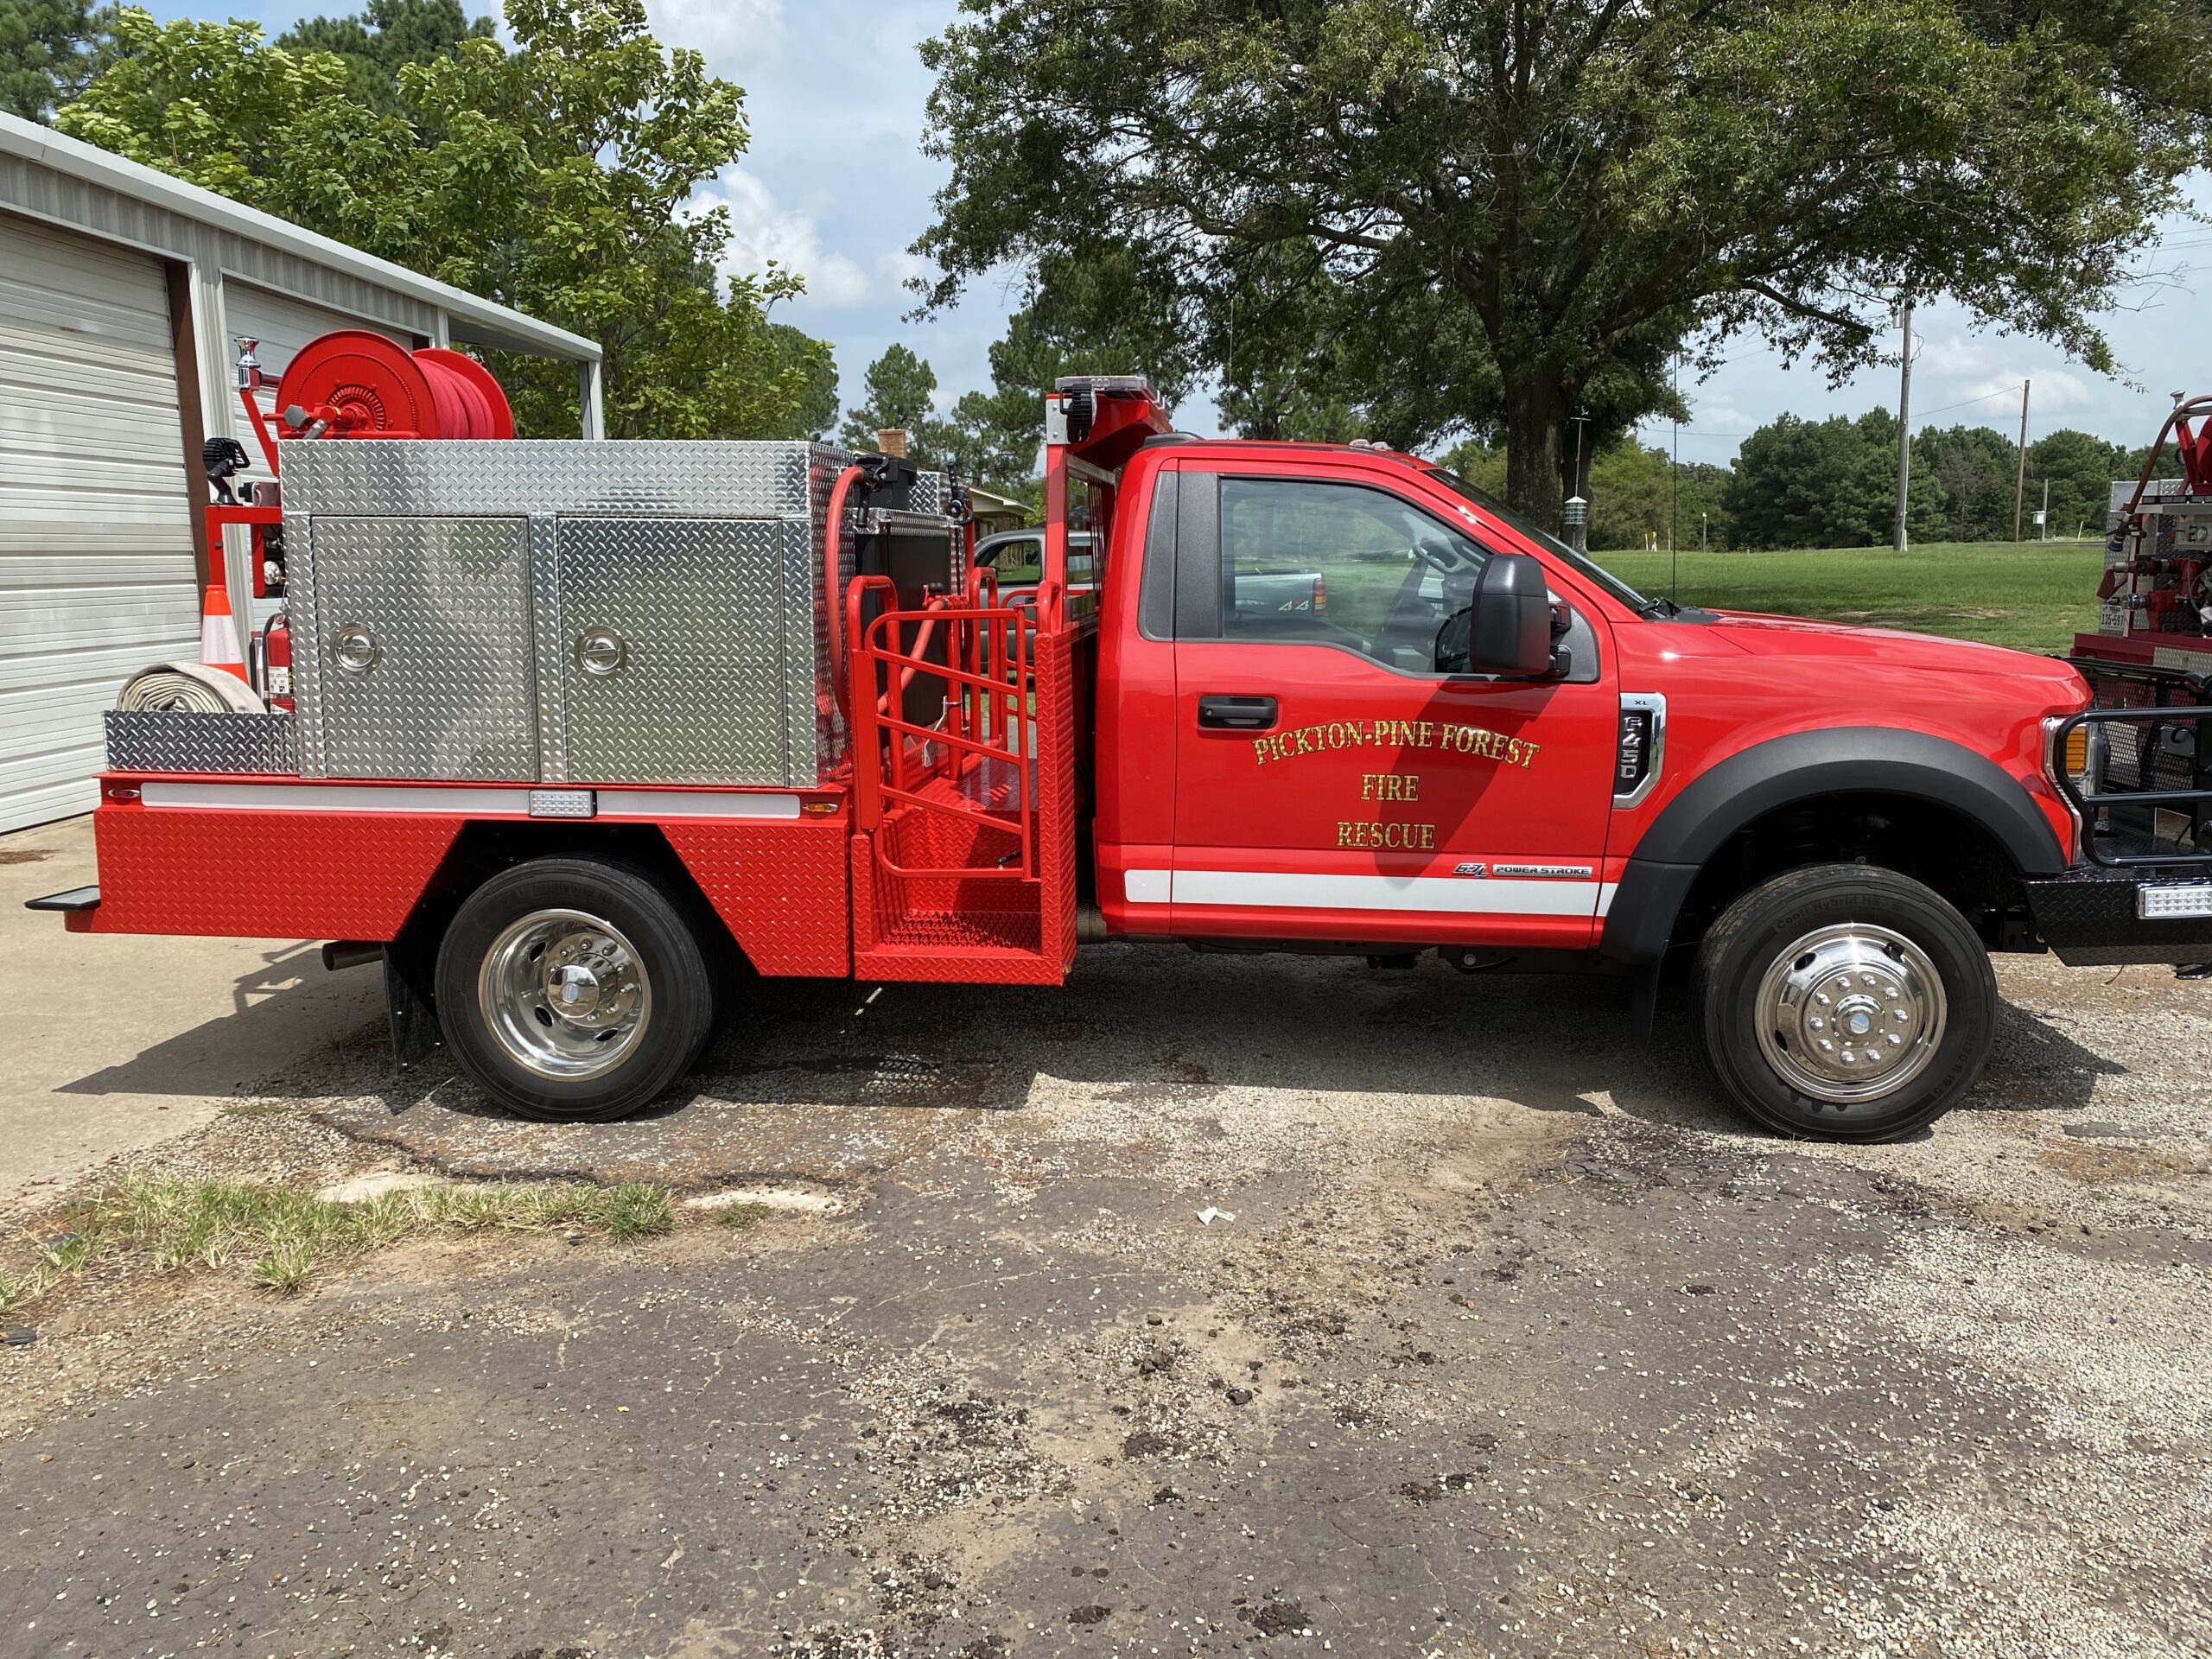 Pickton-Pine Forest Volunteer Fire Department adds a new brush truck to their fleet